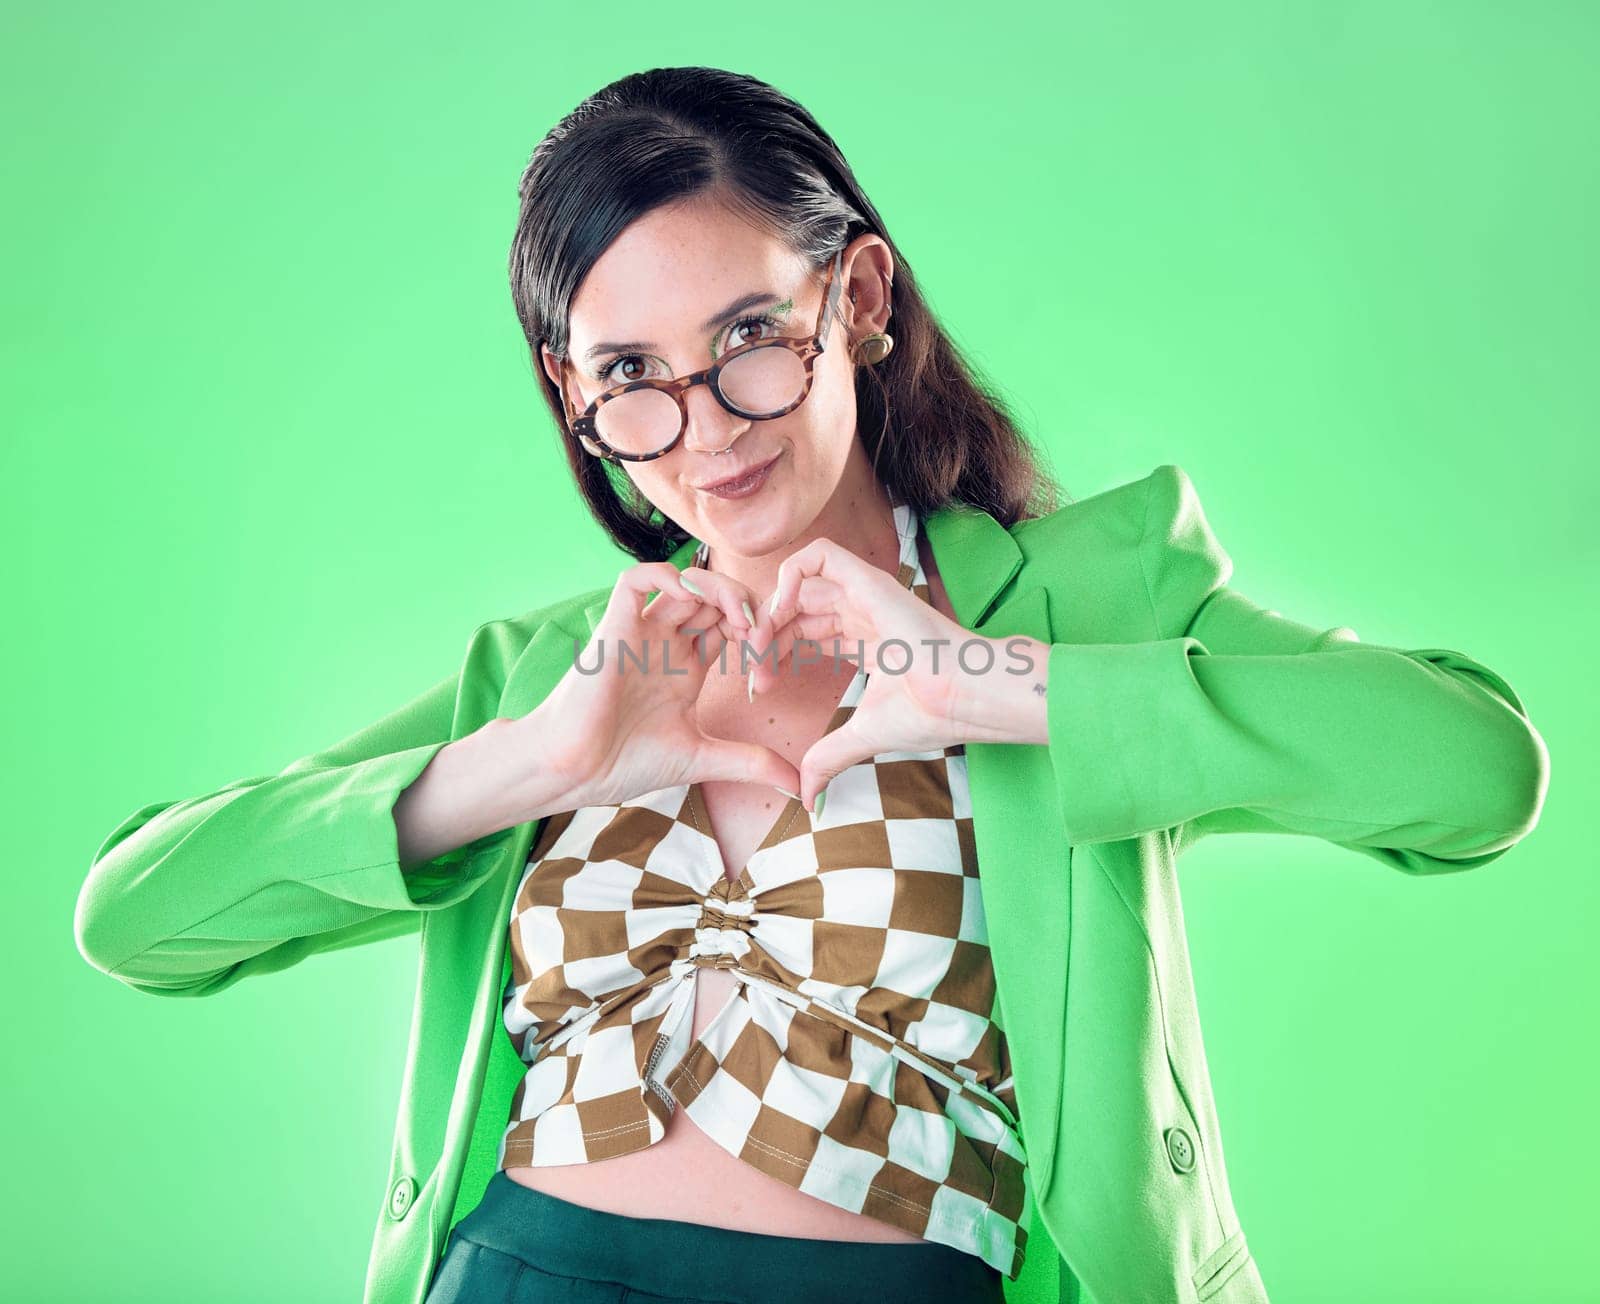 Portrait, hands and heart with a woman on a green background in studio for love, romance or health. Social media, emoji and affection with a trendy person posing or making a hand sign for style.